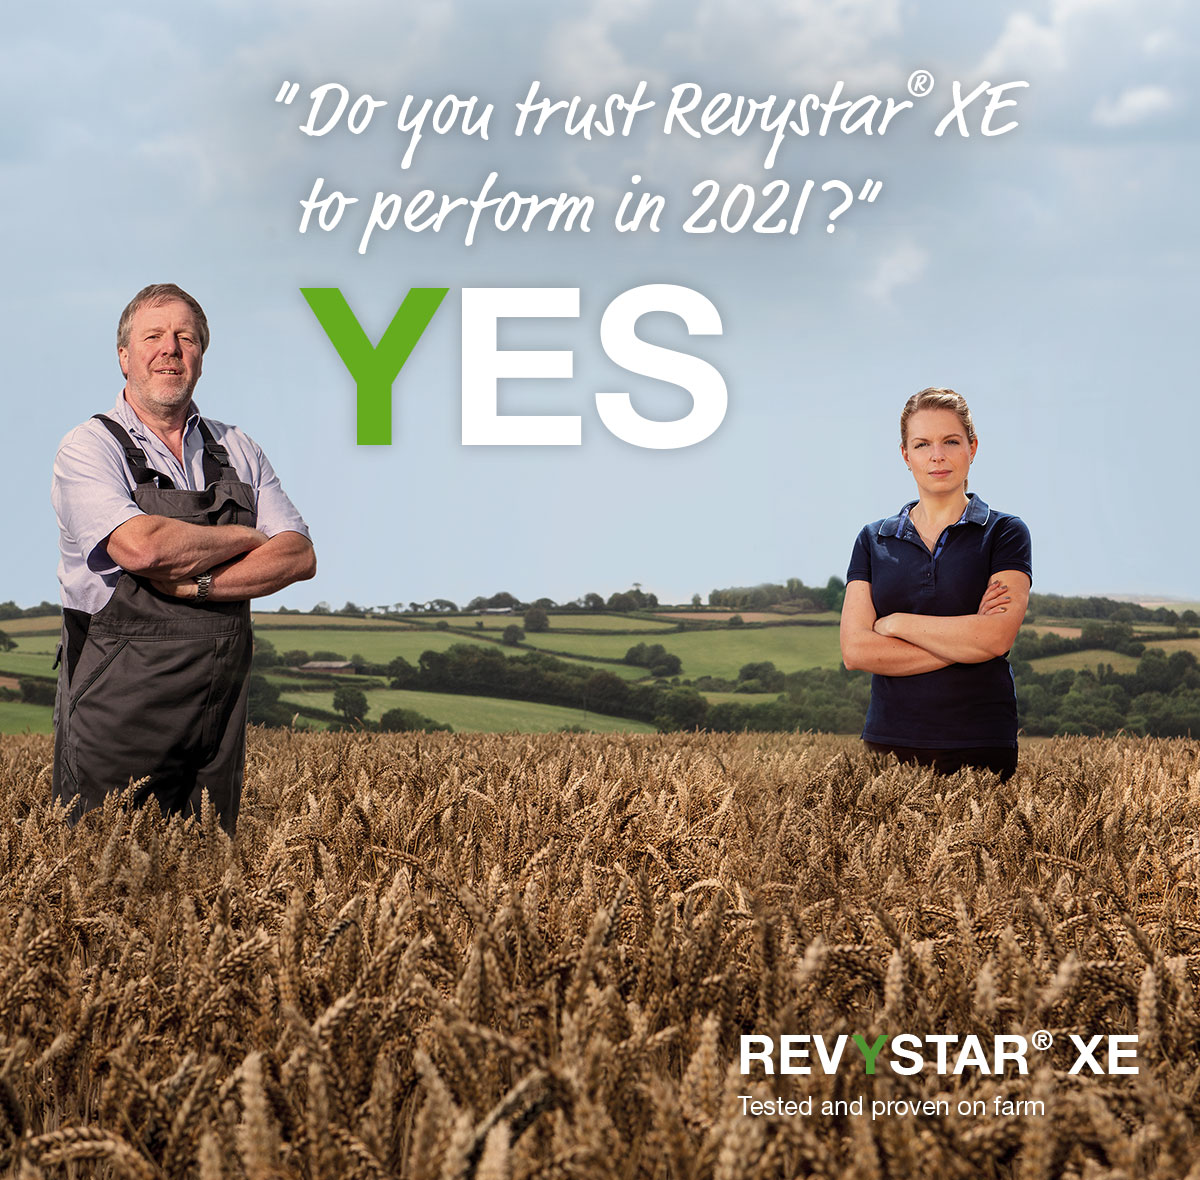 ''Do you trust Revystar XE to perform in 2021?''